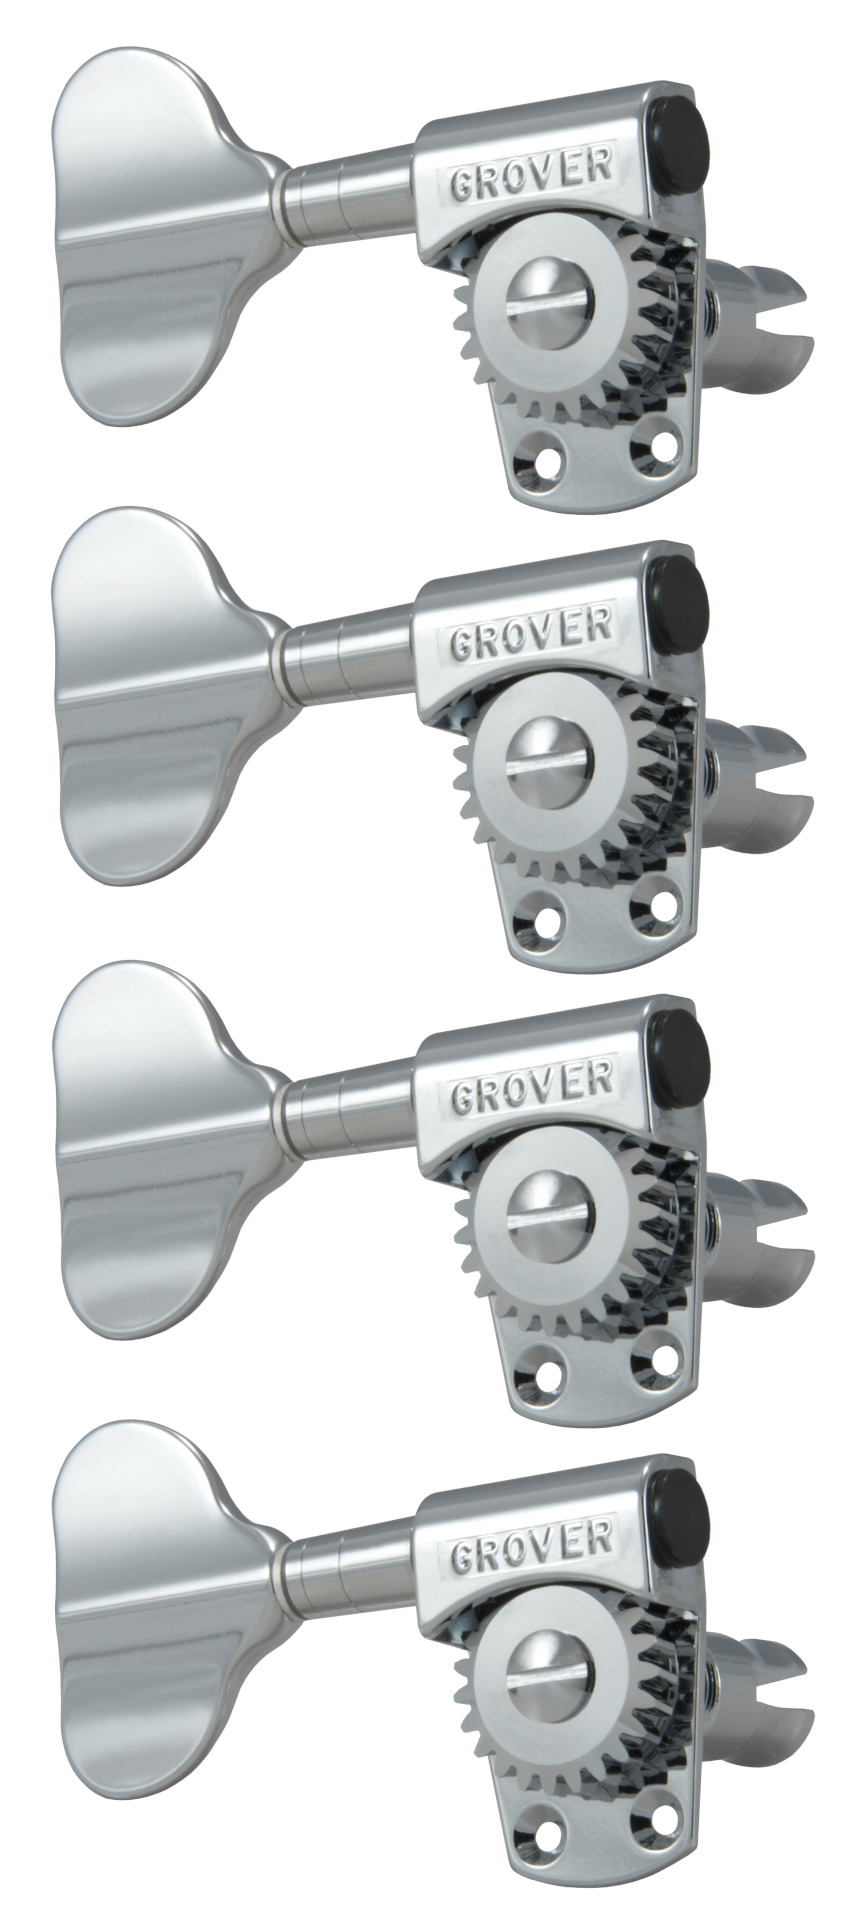 Grover 145CL4 Titan Electric Bass Machines - Bass Machine Heads, 4-in-Line, Lefthand, Treble Side (Right) - Chrome